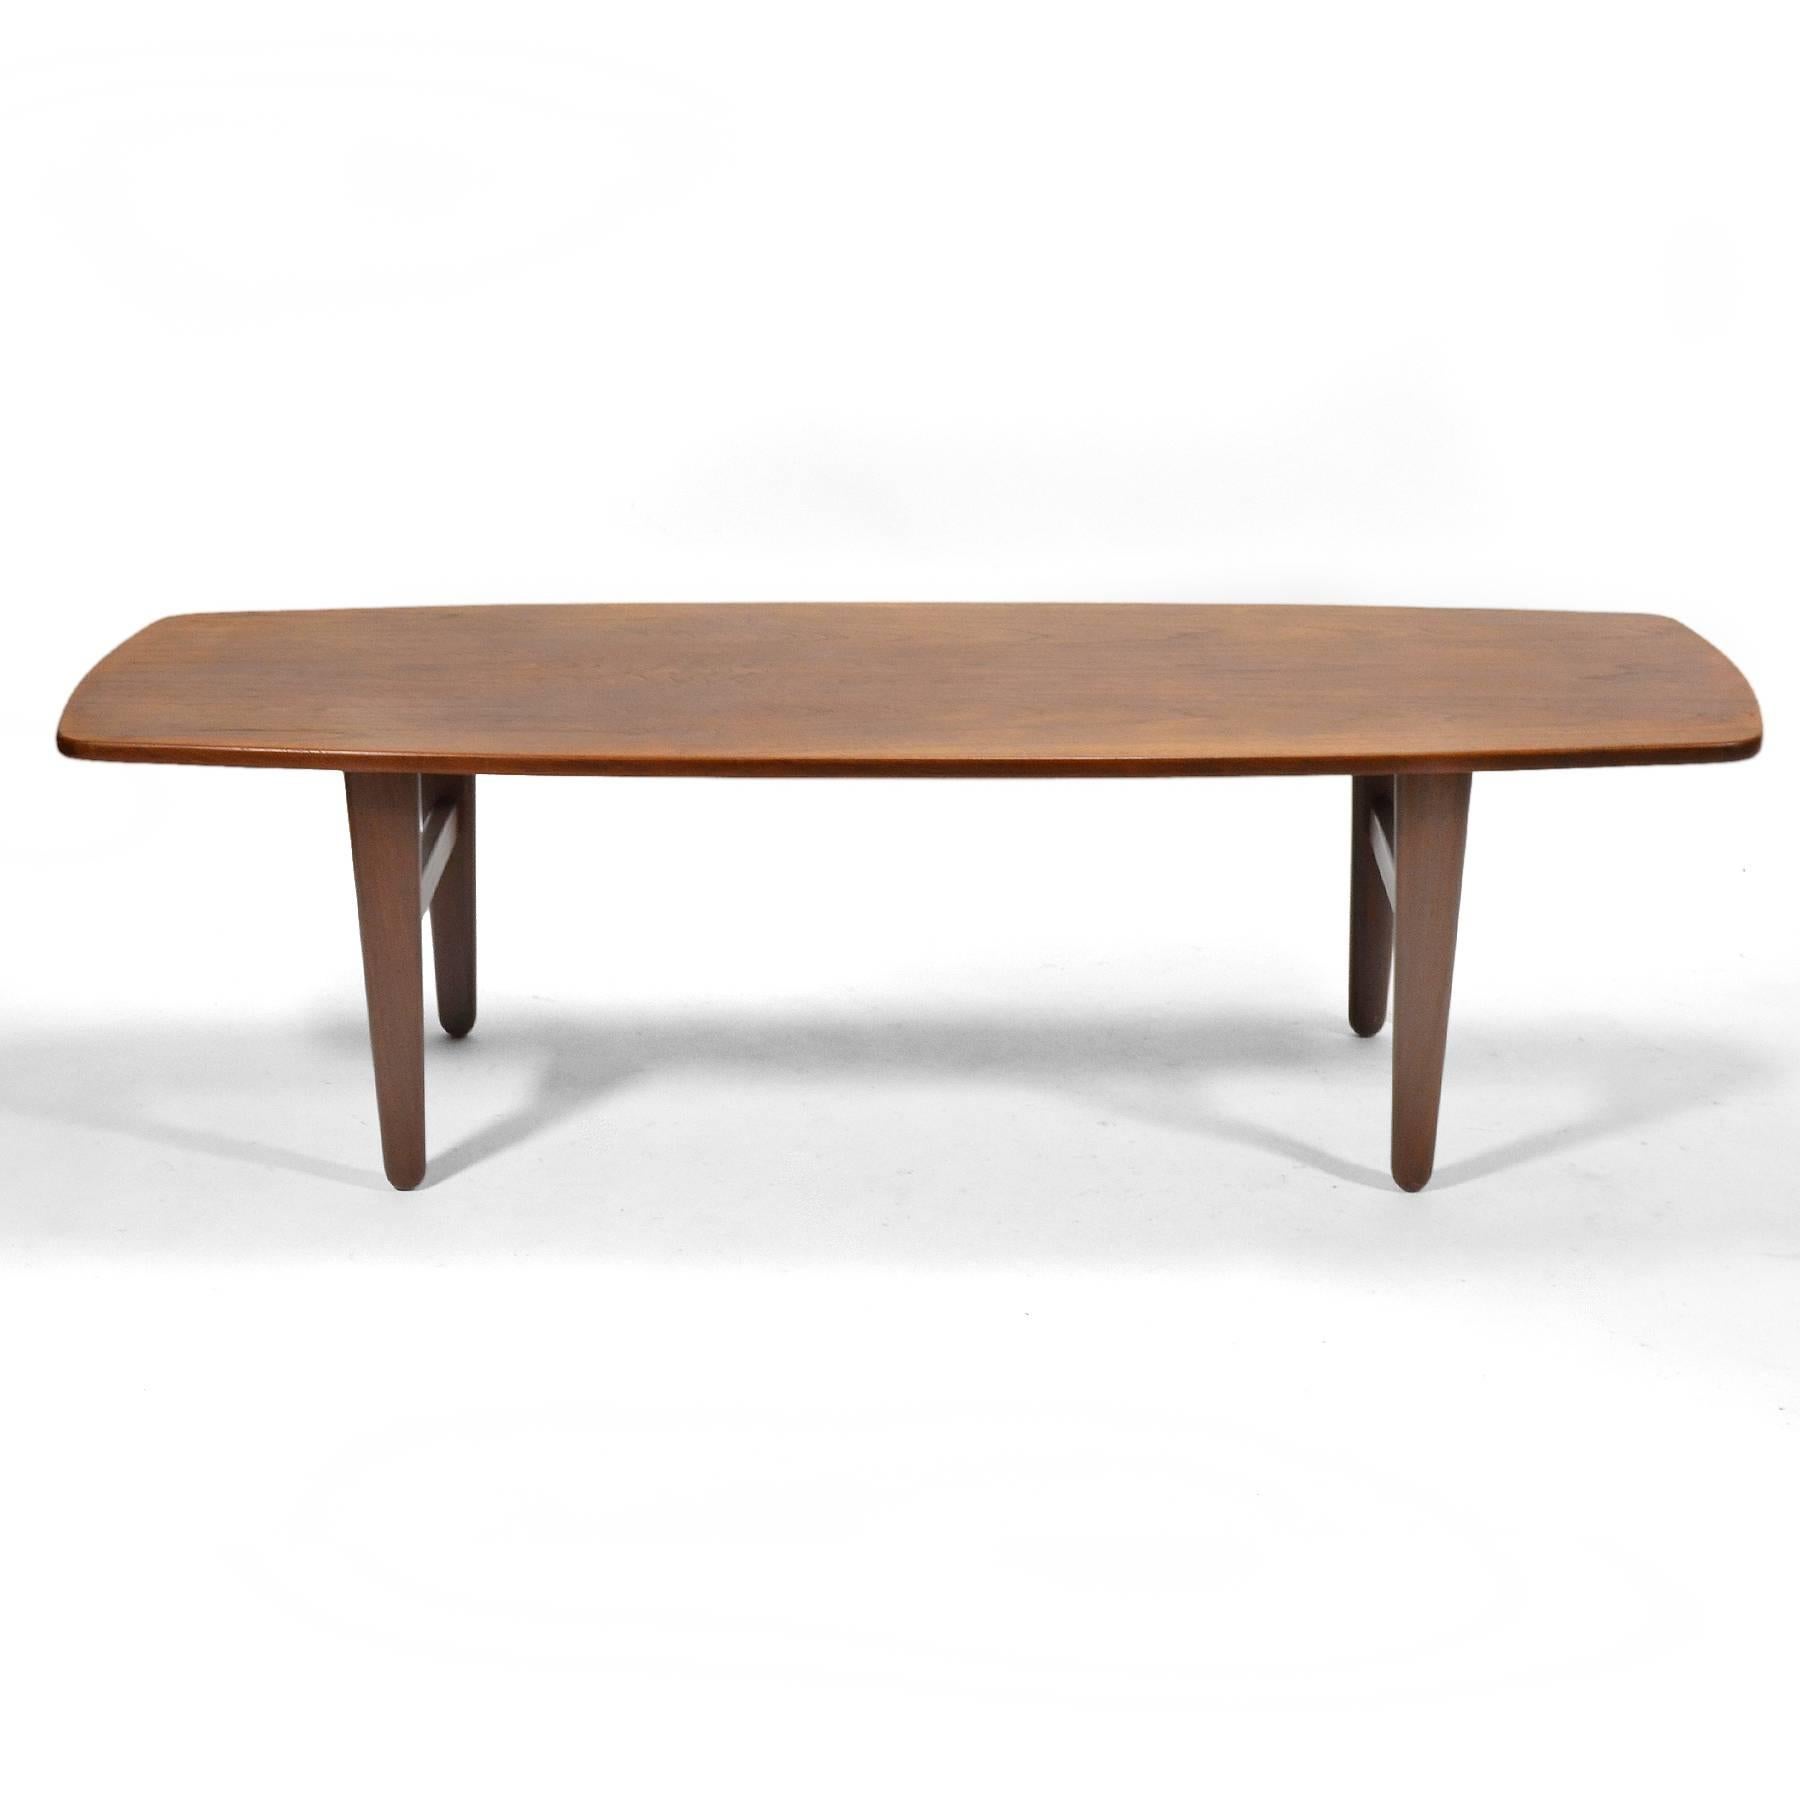 Wonderful teak Svend Madsen coffee table by K. Knudsen & Son with softly curved lines and tapered legs.